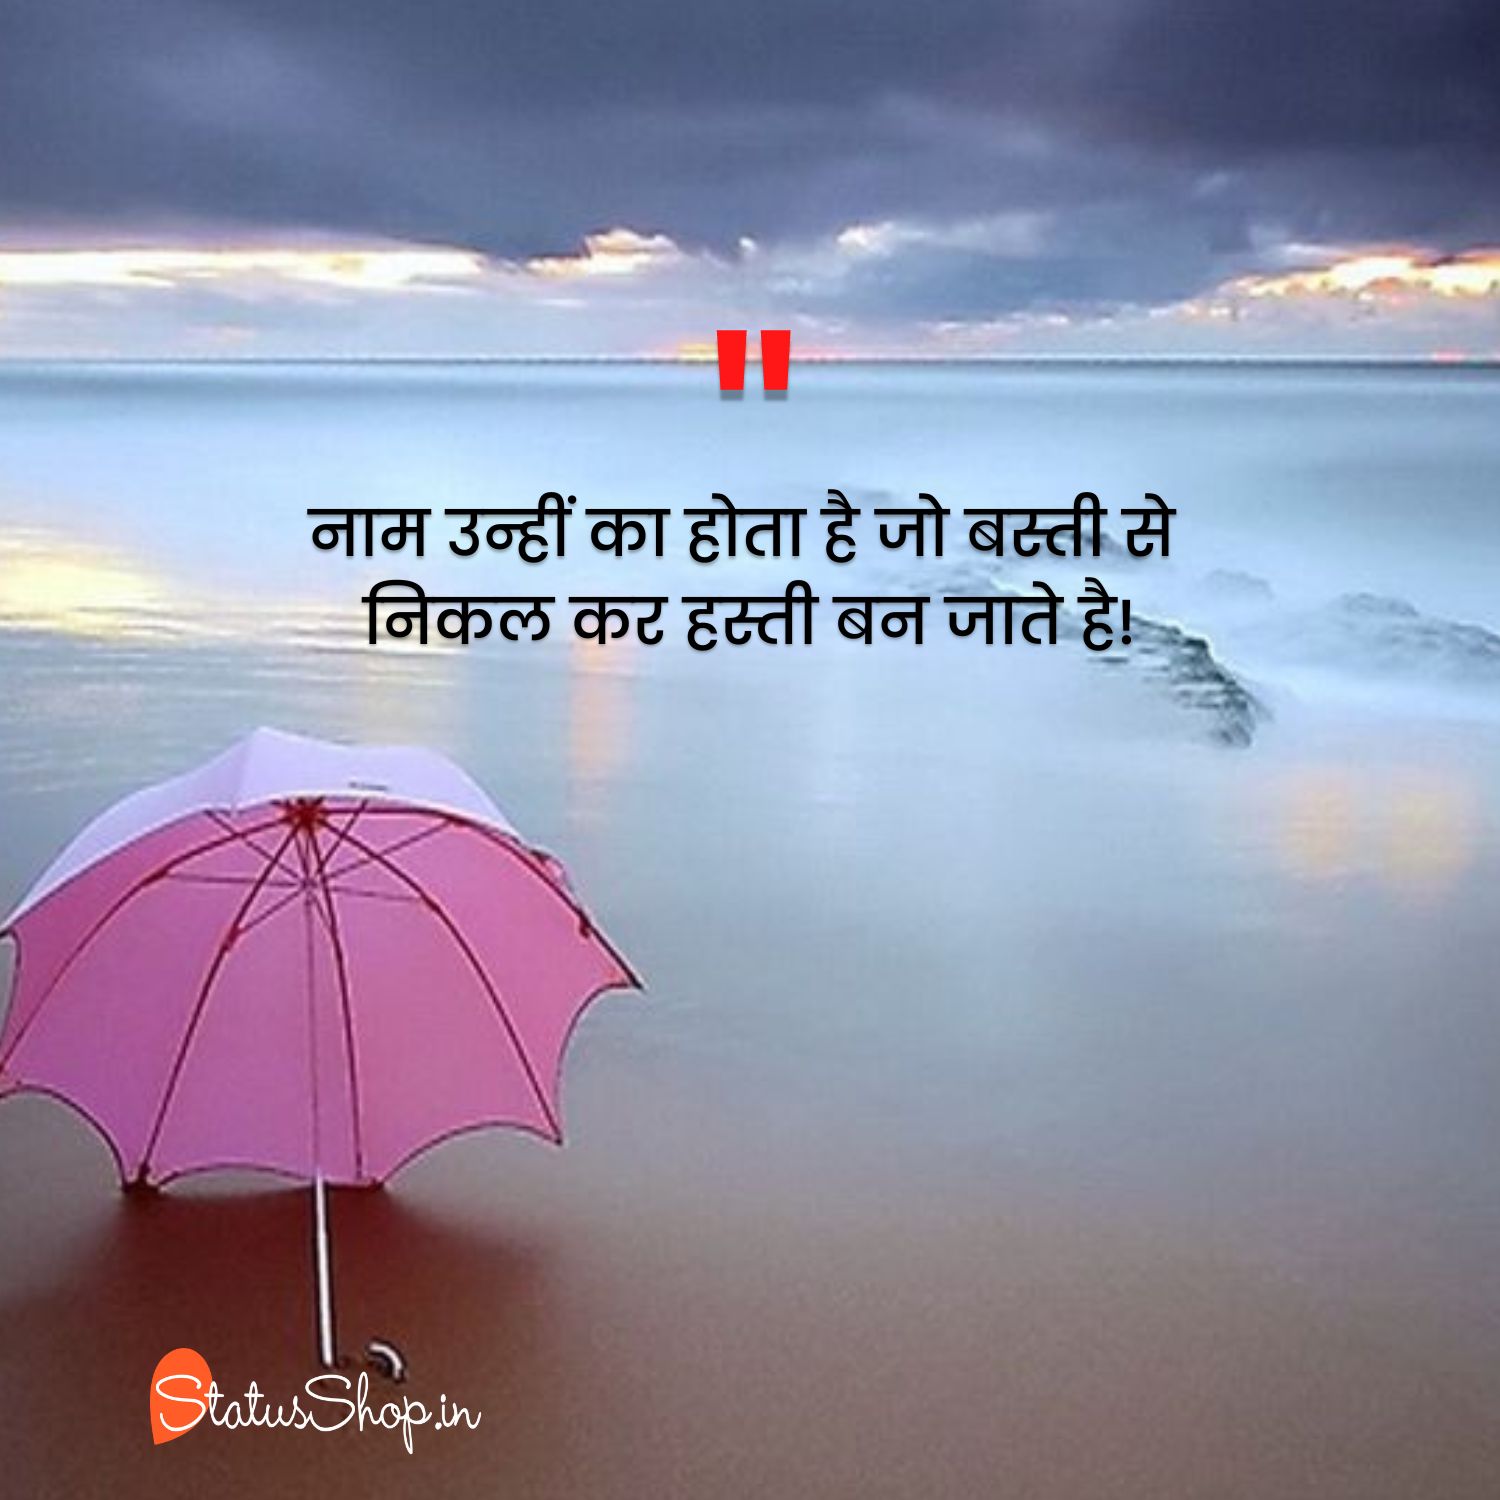 Life-Reality-Motivational-Quotes-In-Hindi